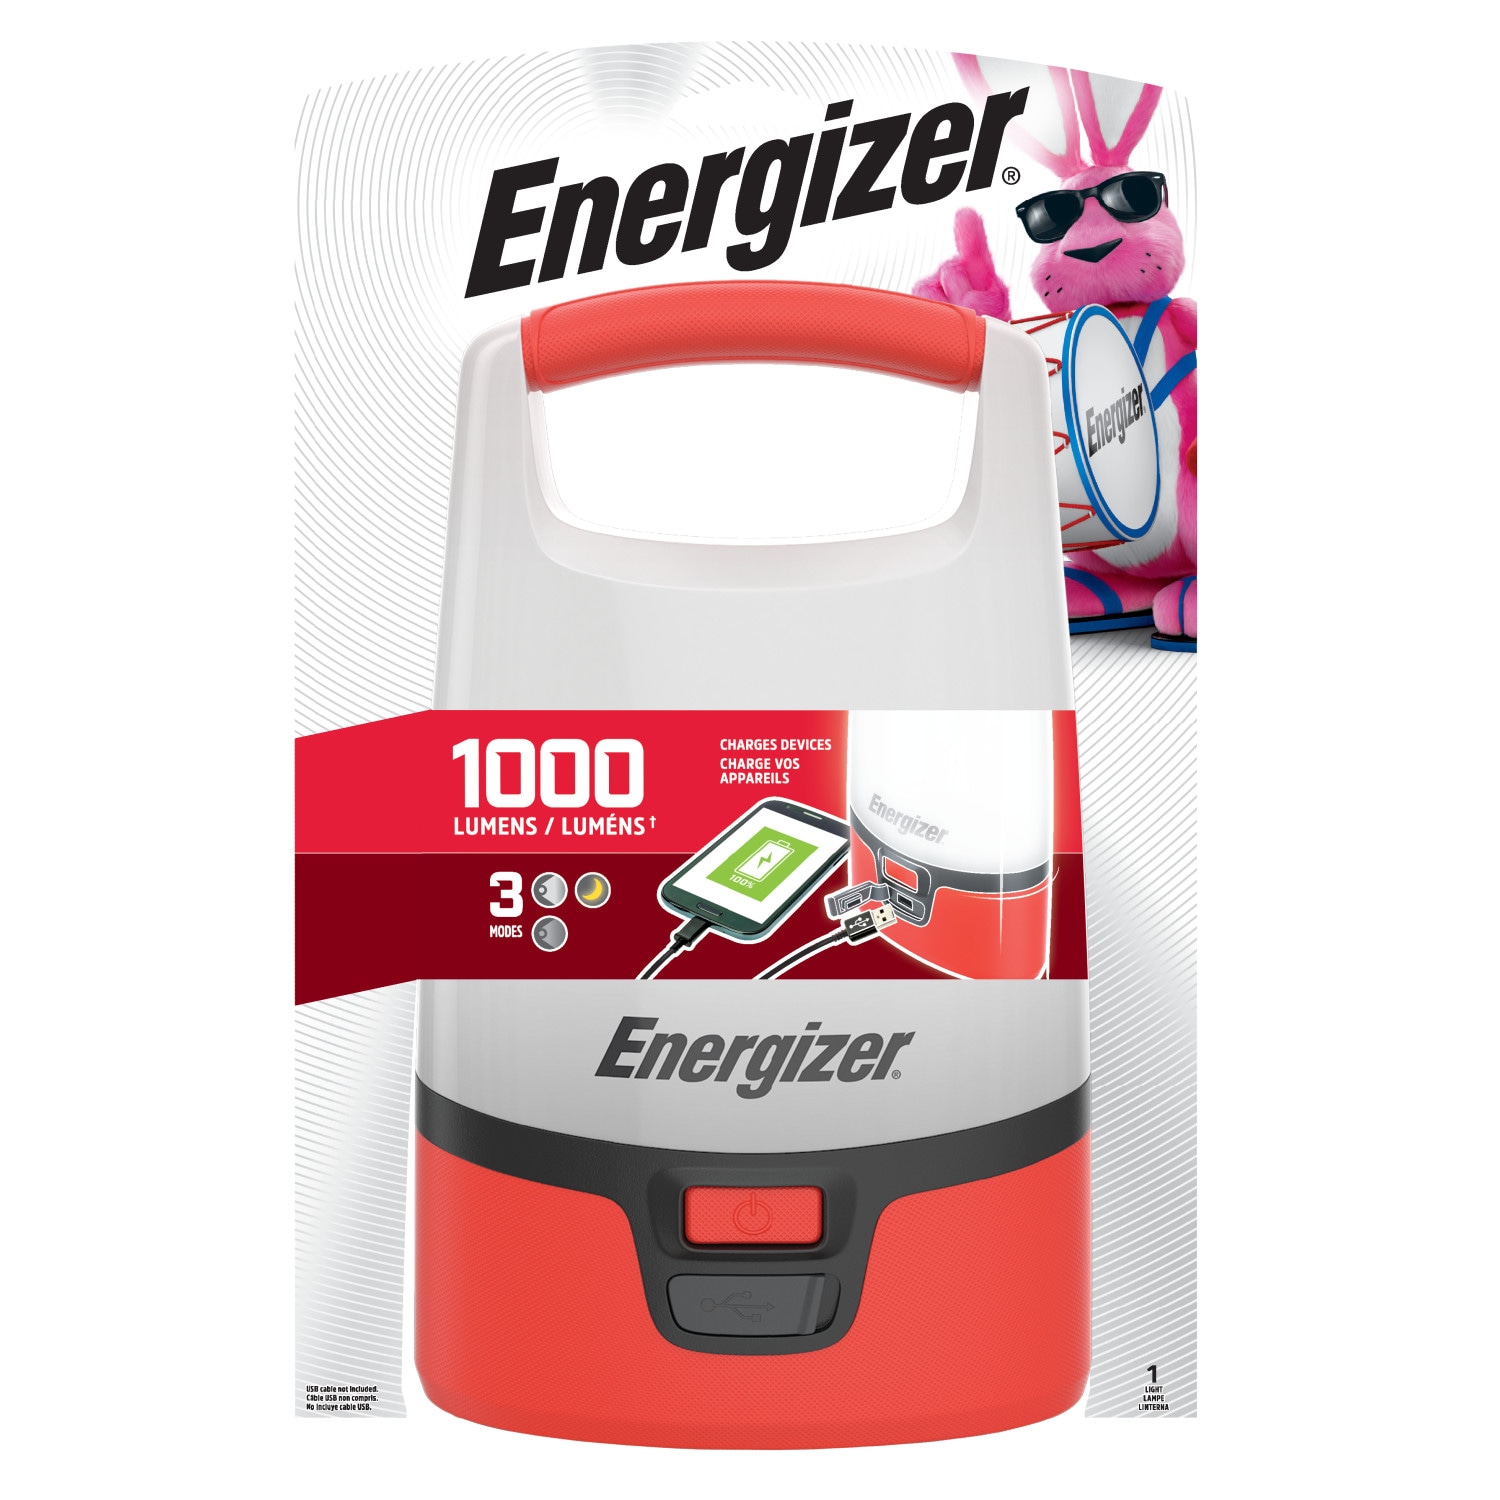 ENERGIZER LED Camping Lantern 360 PRO, IPX4 Water Resistant Tent Light,  Ultra Bright Battery Powered Lanterns for Camping, Outdoors, Emergency Power  Outage